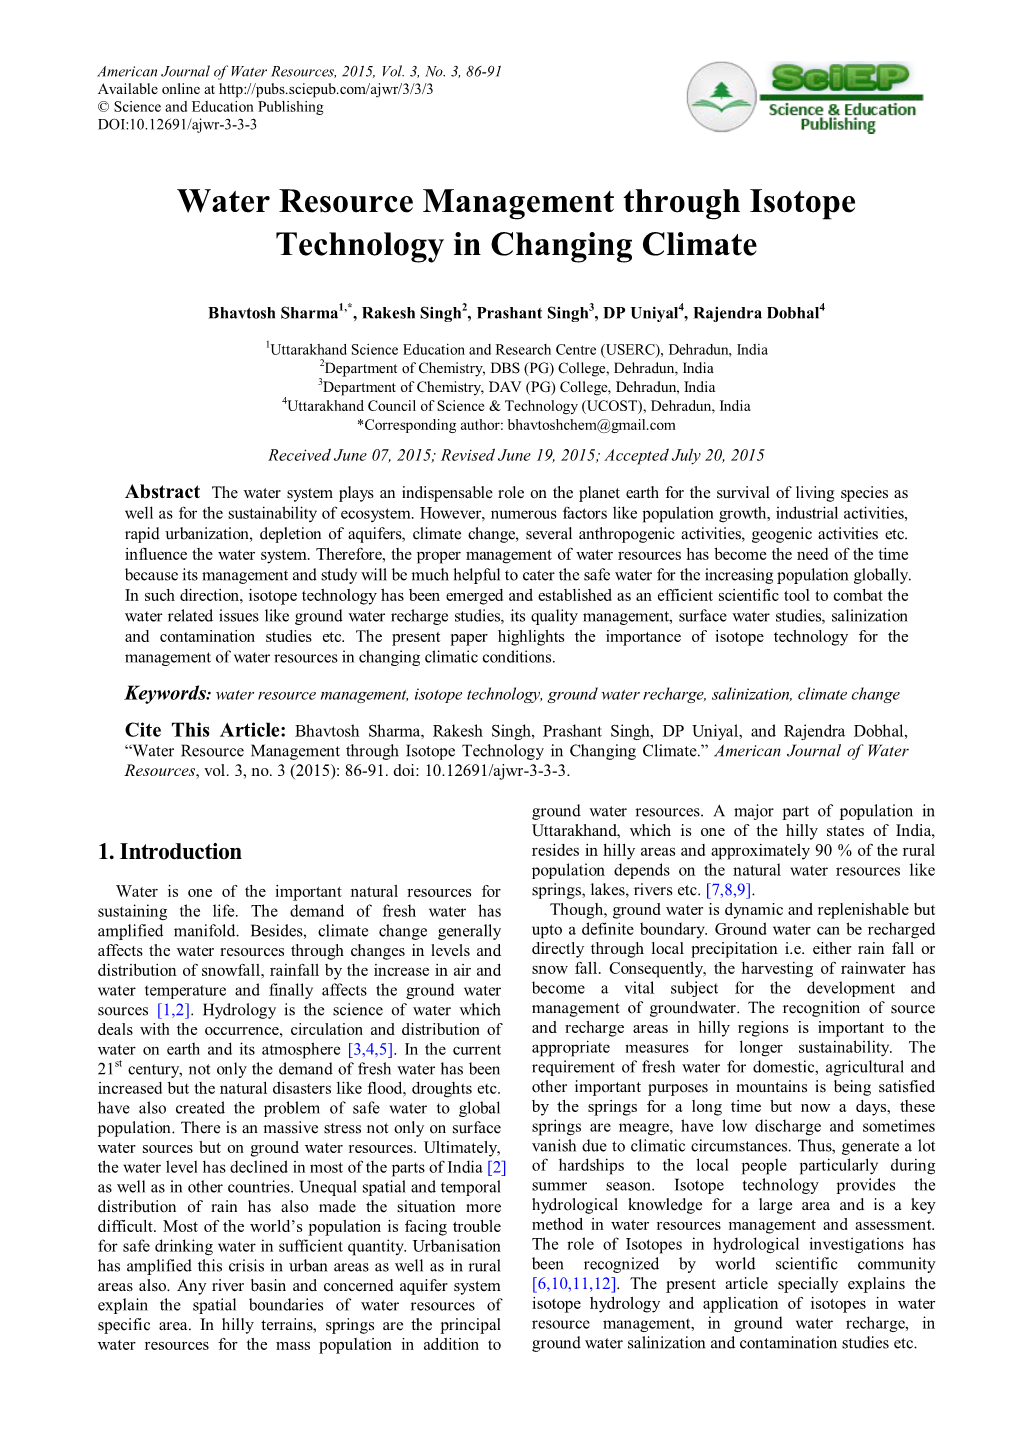 Water Resource Management Through Isotope Technology in Changing Climate